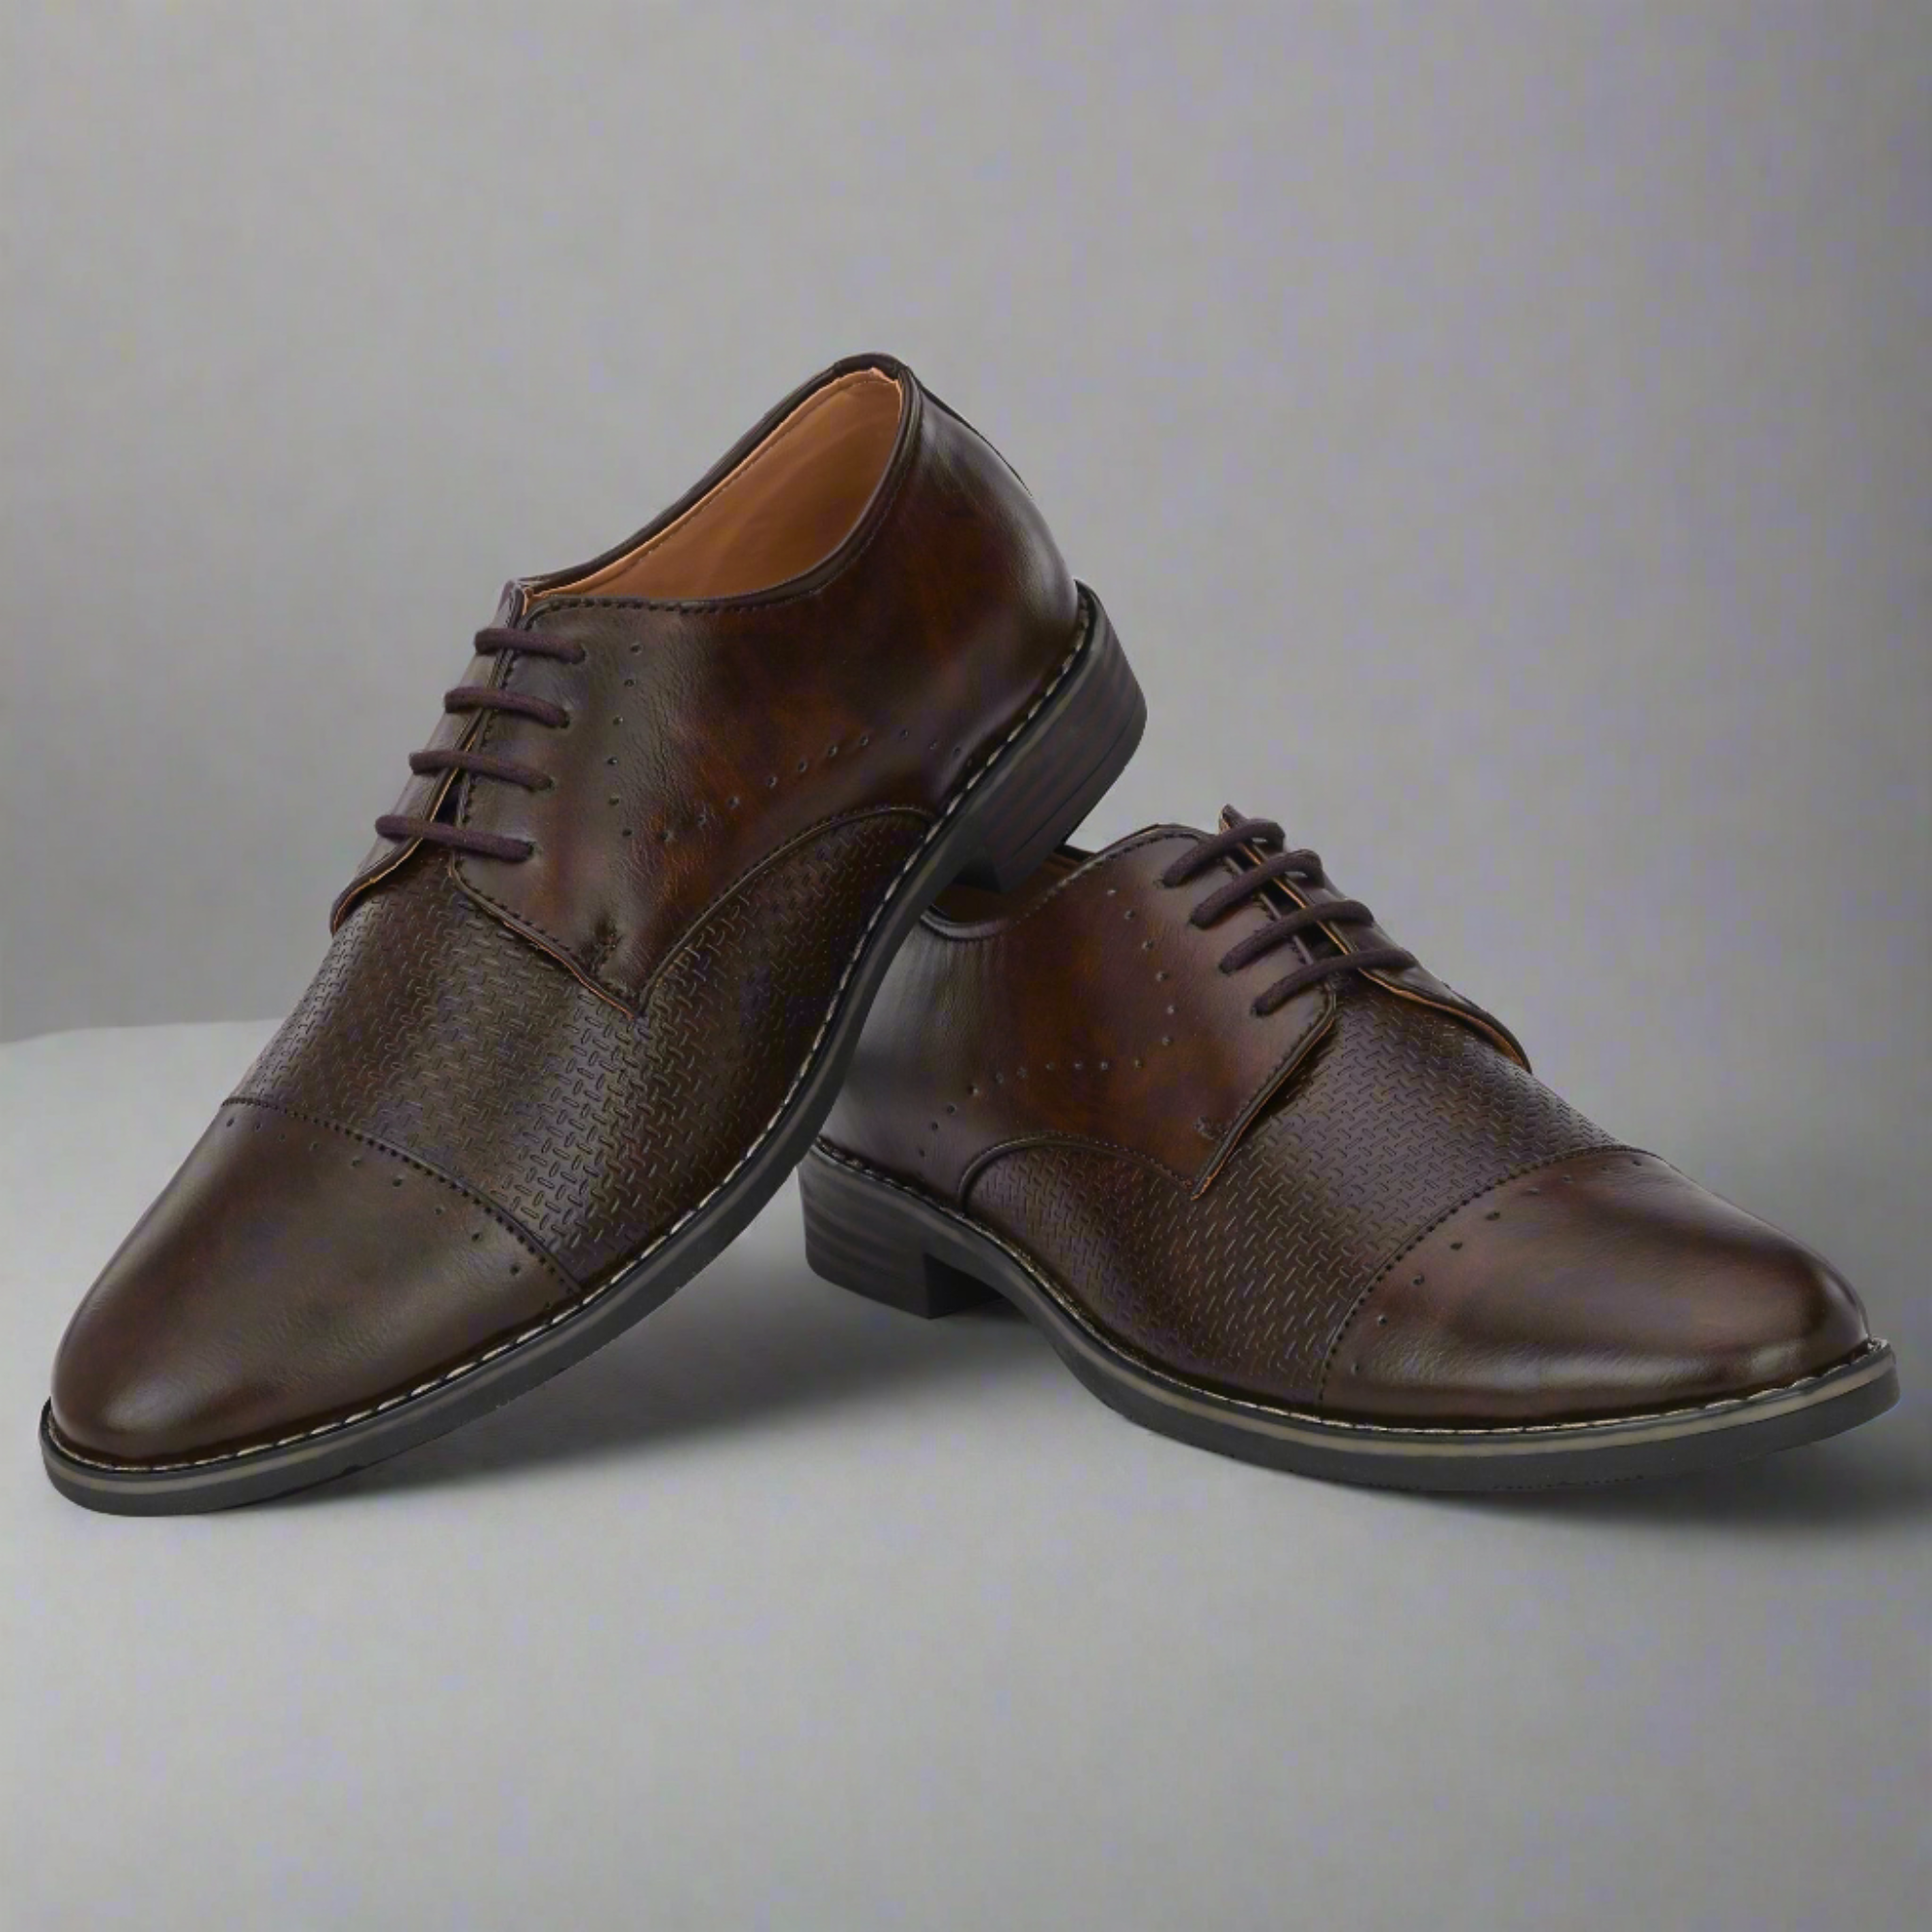 Attitudist Unisex Handcrafted Derby Matte Brown Formal Lace-up Shoes With Cap Toe And Textured Design